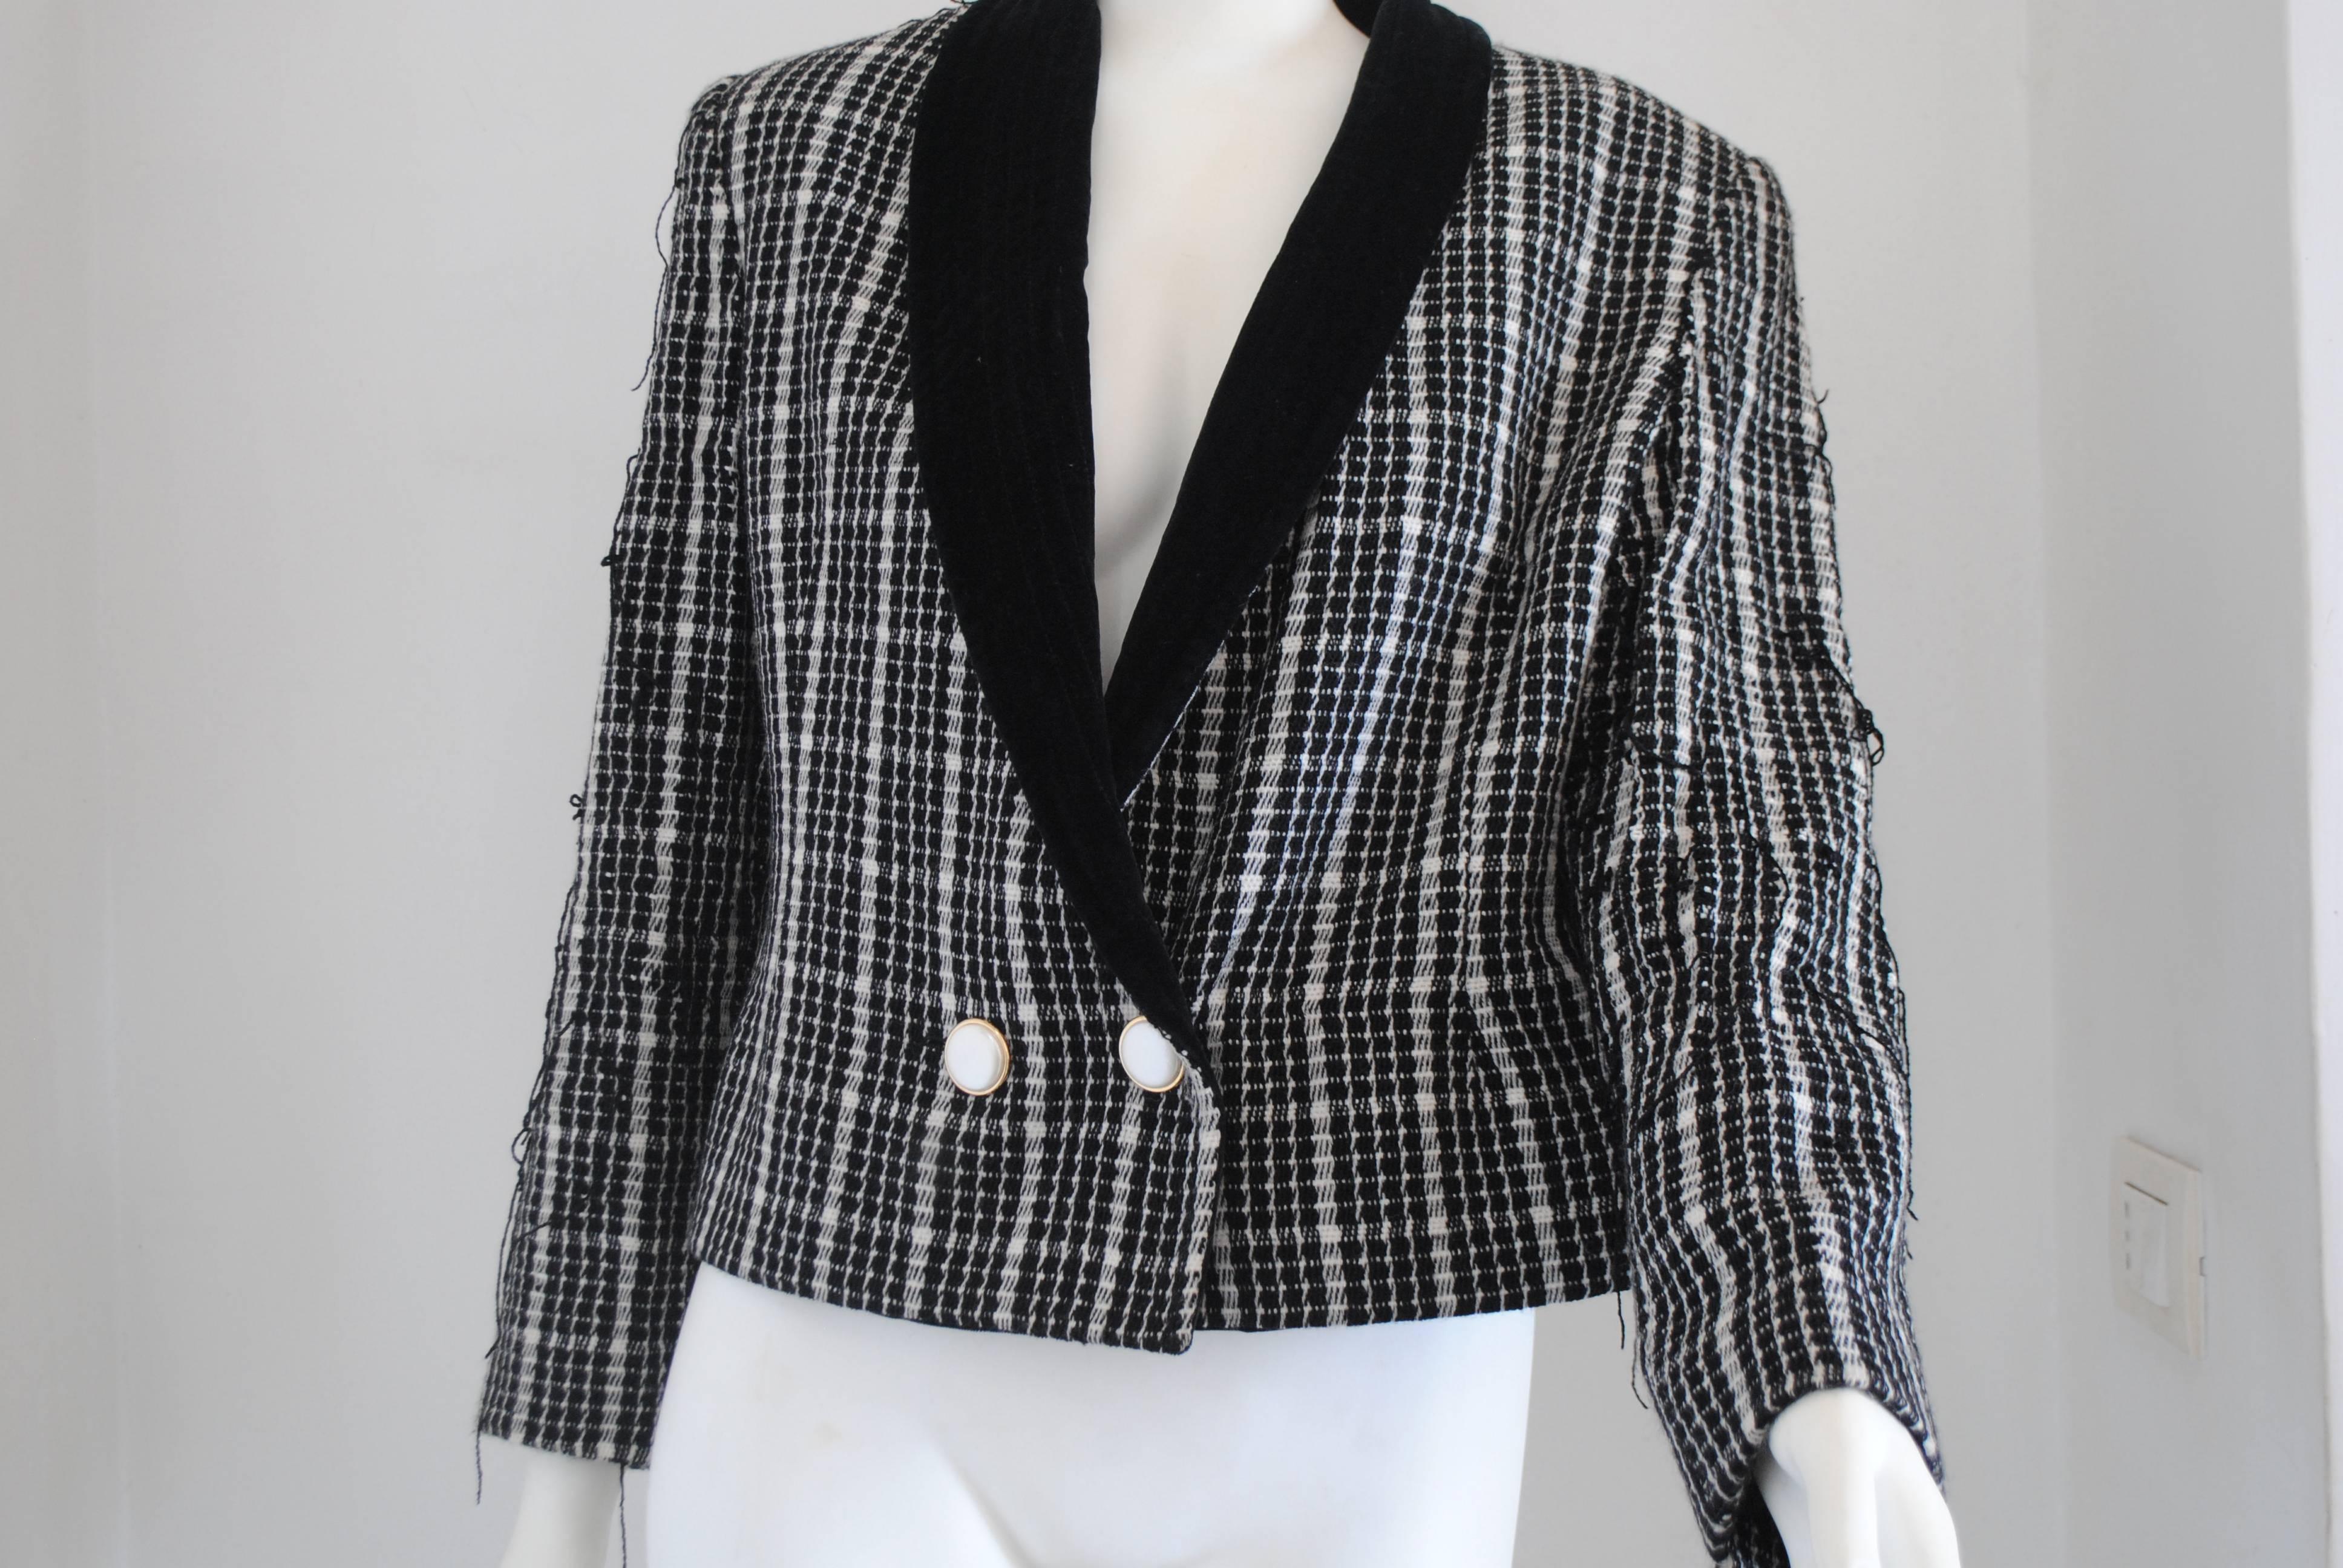 1980s Spazio Pied de Poule Black & White Wool Jacket
Totally made in italy in italian size range 44

Composition: Wool and viscose